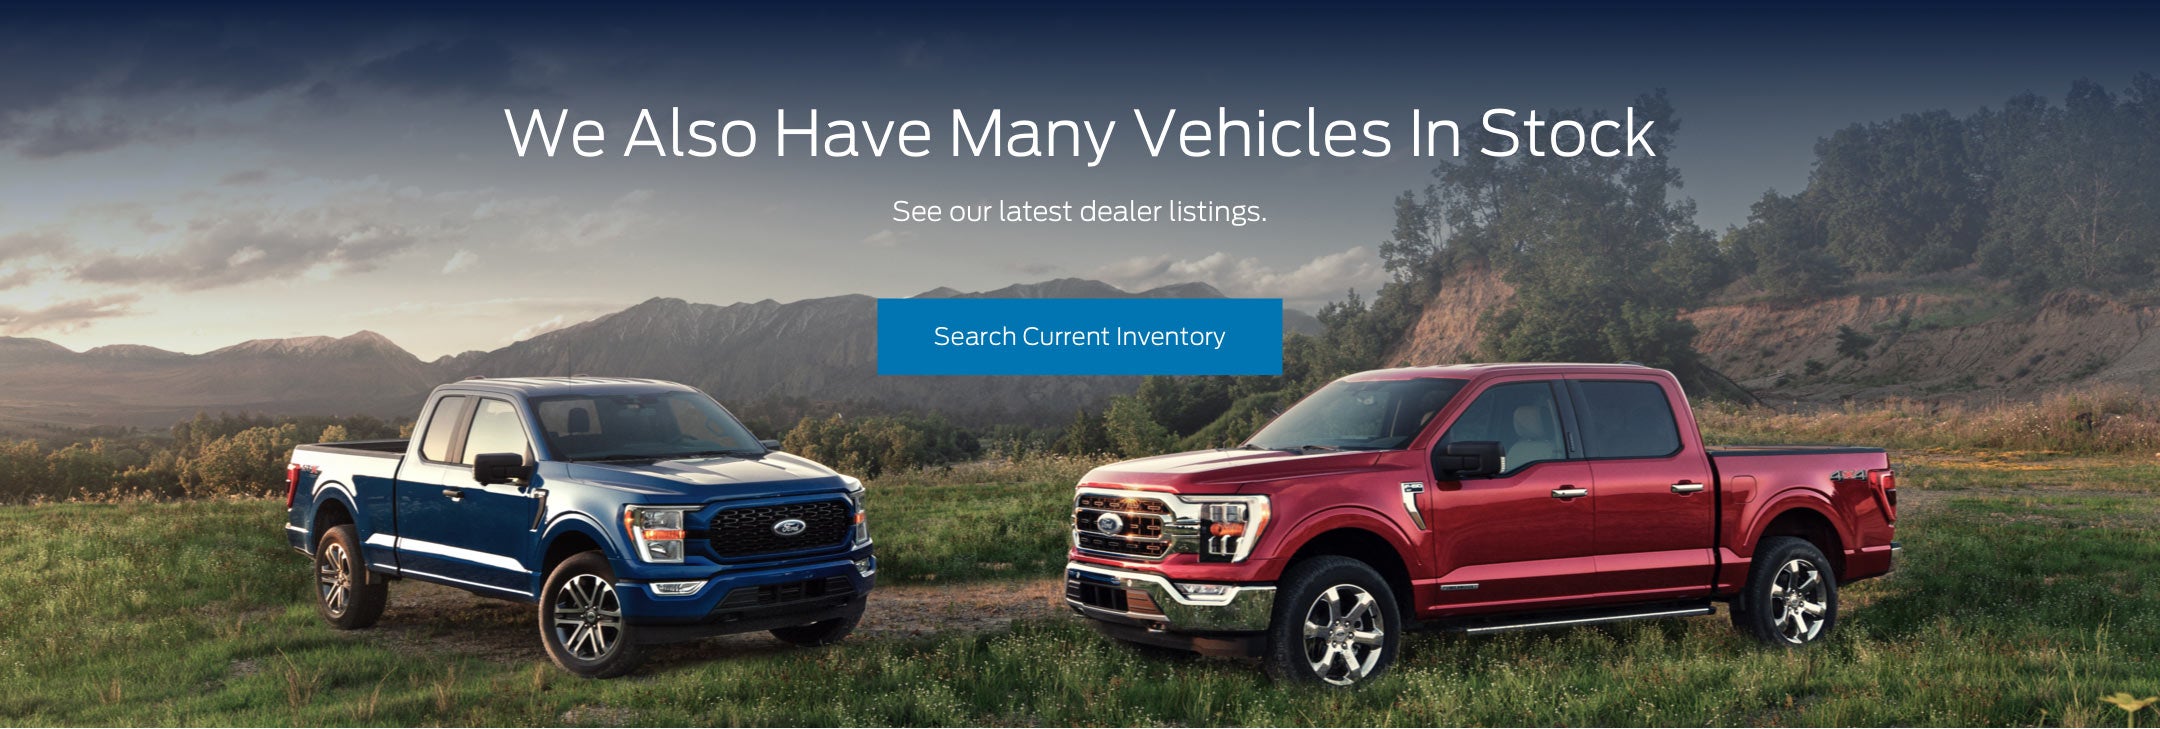 Ford vehicles in stock | Griffith Ford San Marcos in San Marcos TX